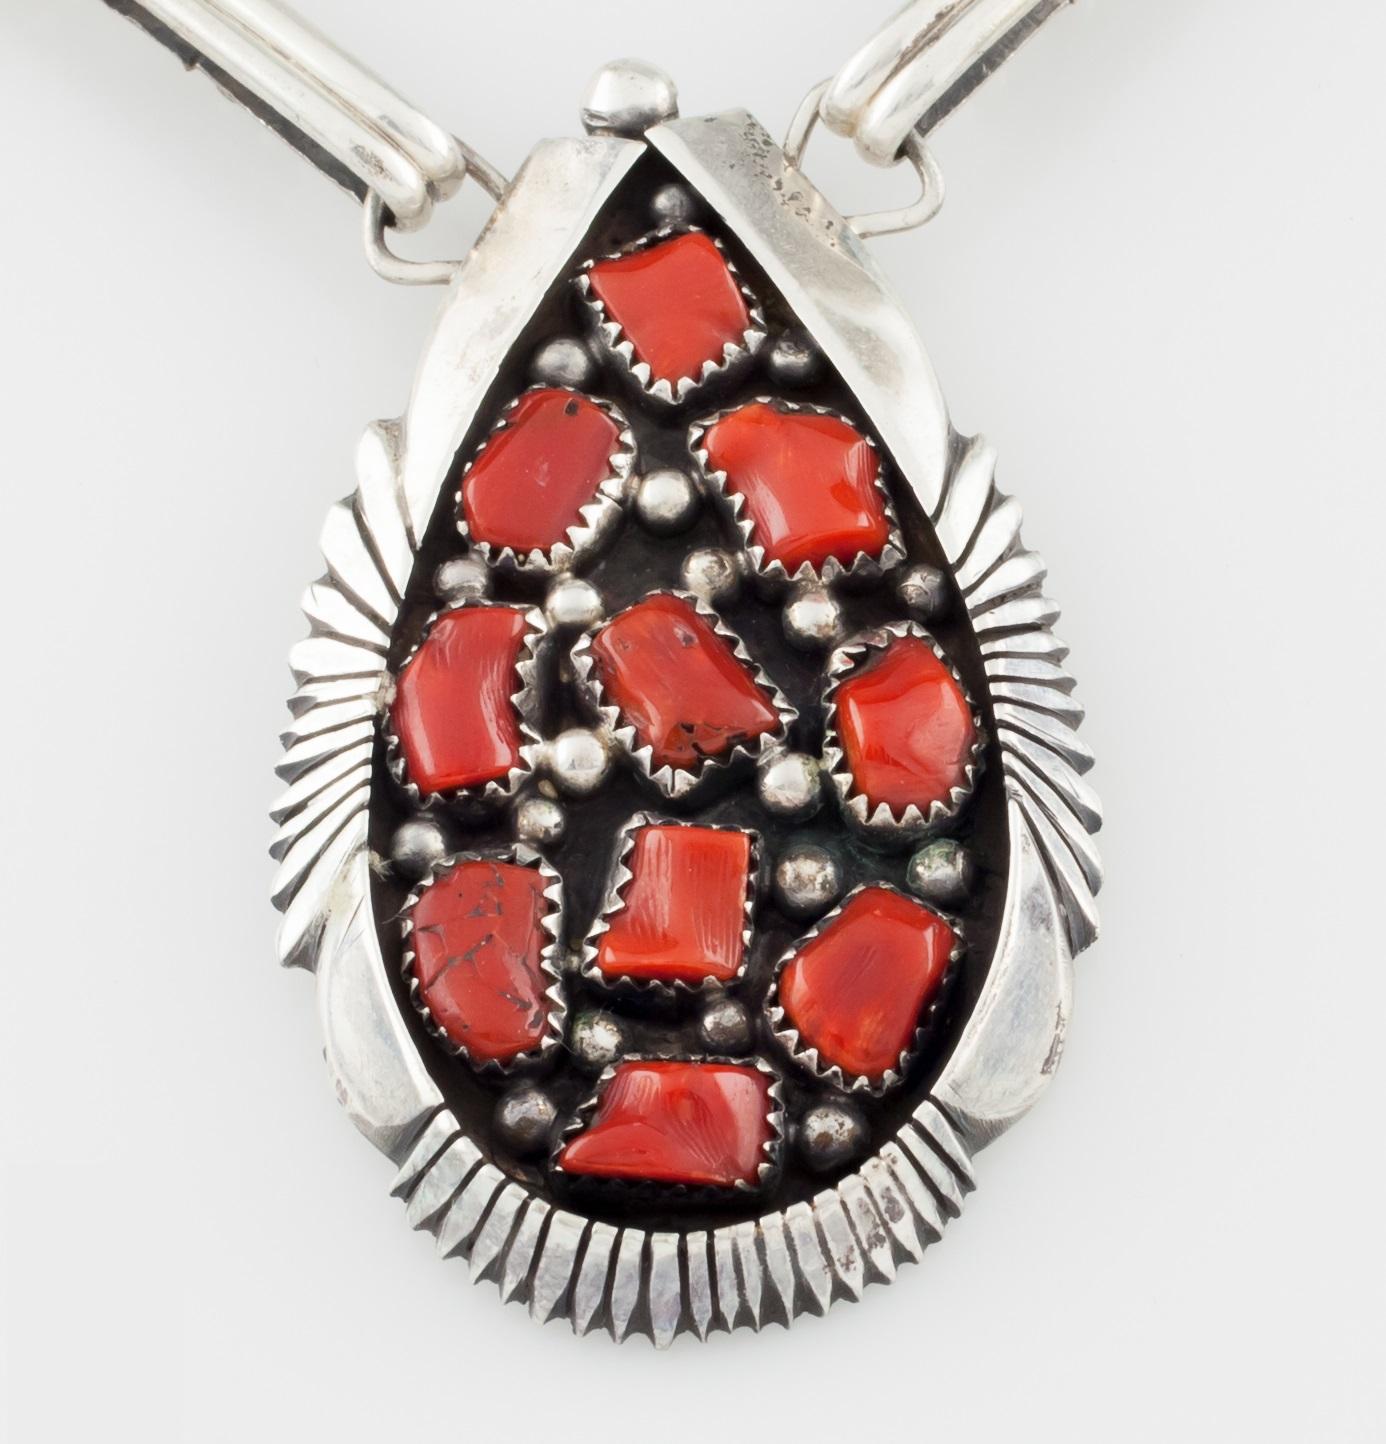 .925 Sterling Silver Native American Necklace 
Accented with 16 Coral stones (excluding centerpiece)
Center piece measures approximately: 1.25